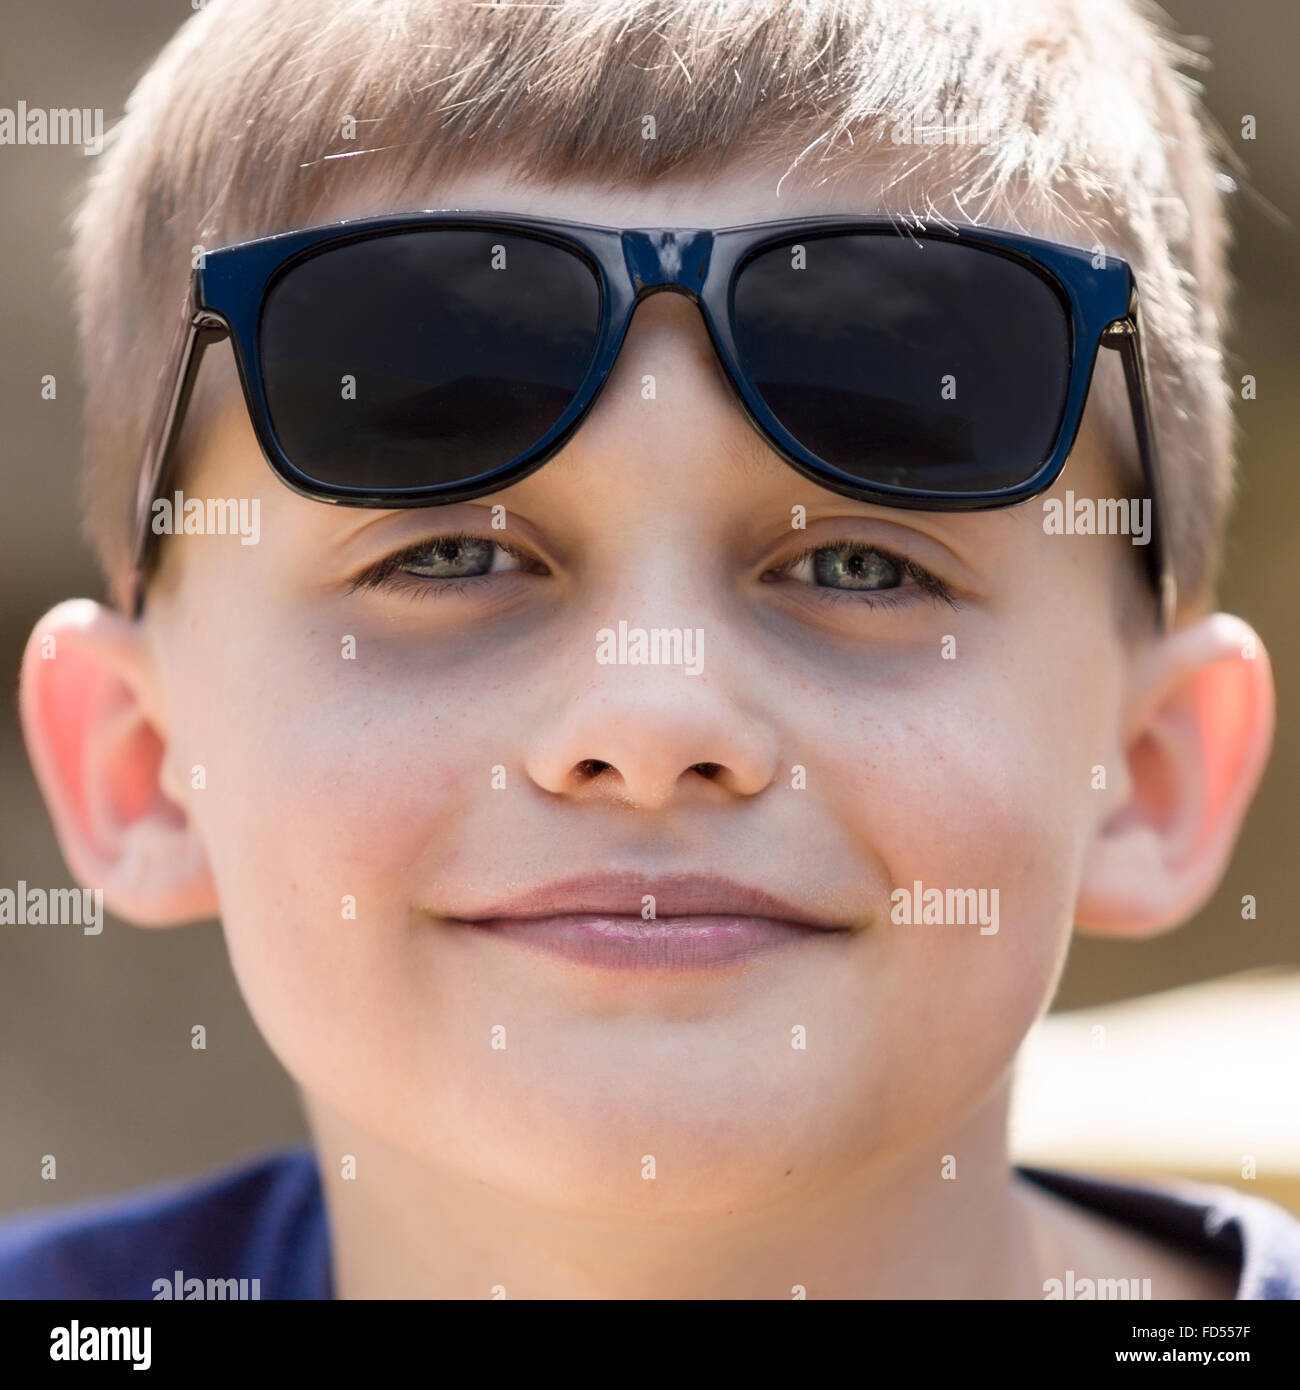 Young boy wearing sunglasses outdoor portrait  Model Release: Yes.  Property Release: No. Stock Photo